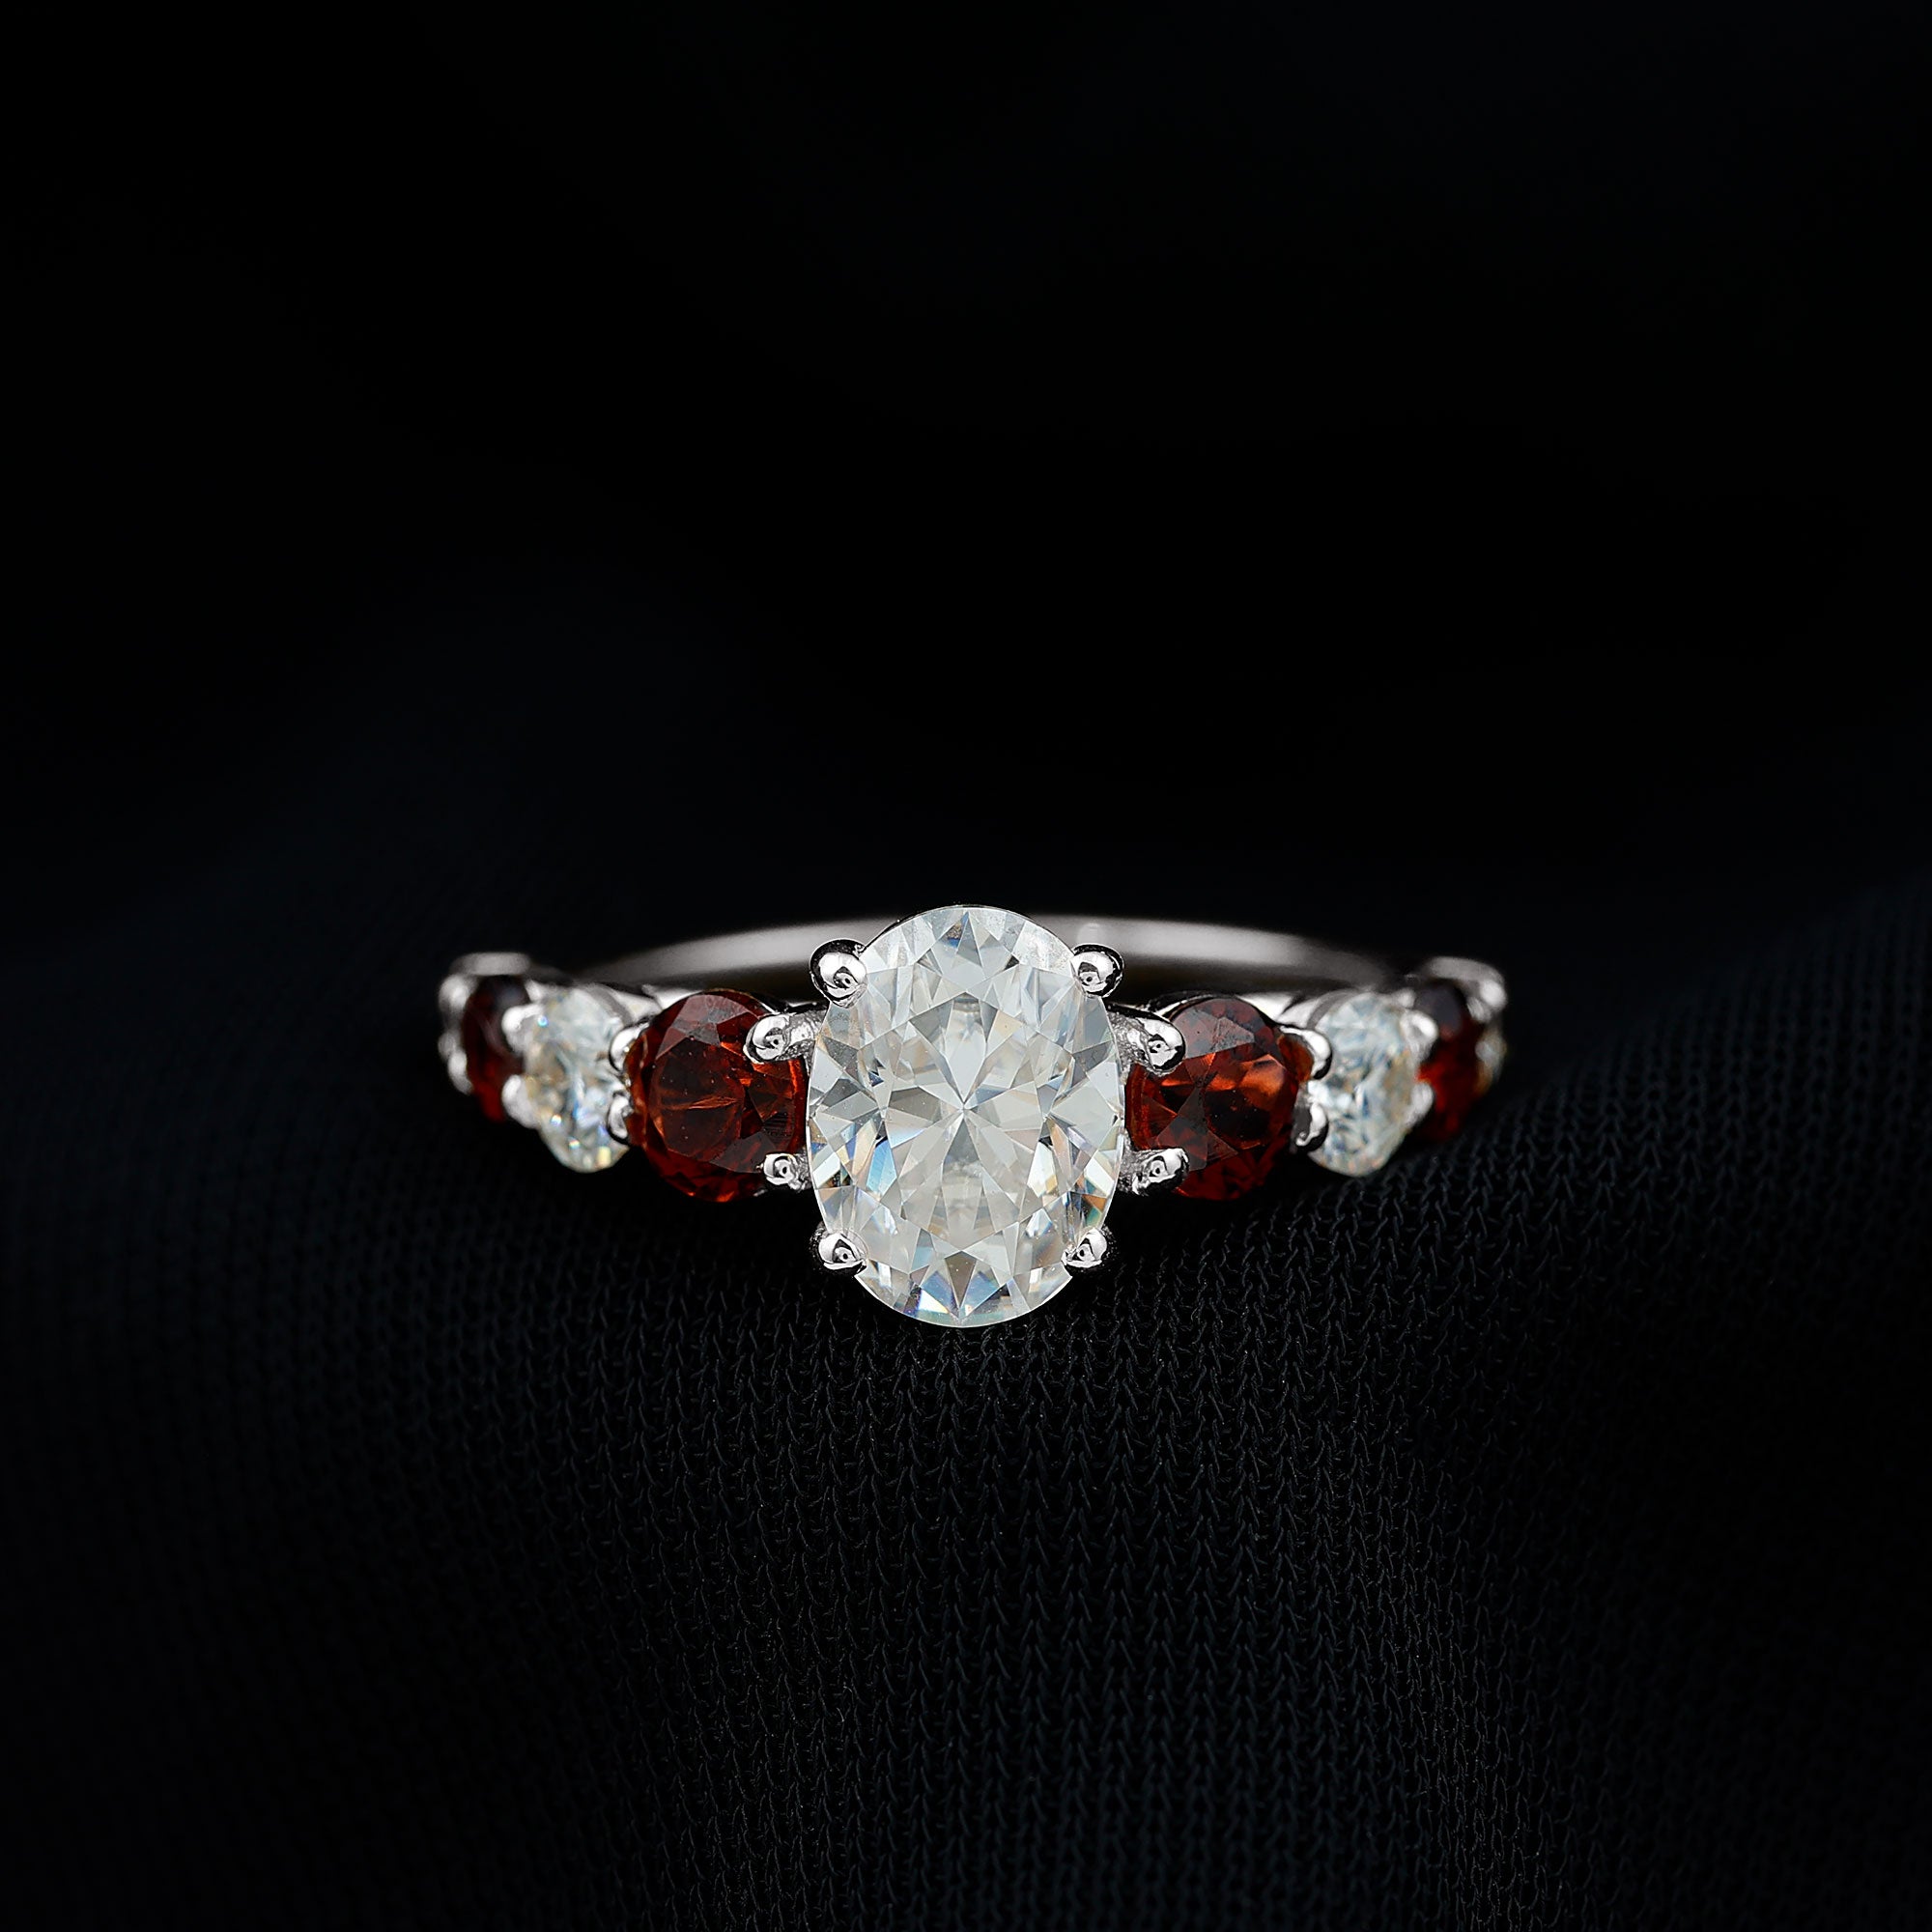 Oval Moissanite and Garnet Engagement Ring Moissanite - ( D-VS1 ) - Color and Clarity - Rosec Jewels